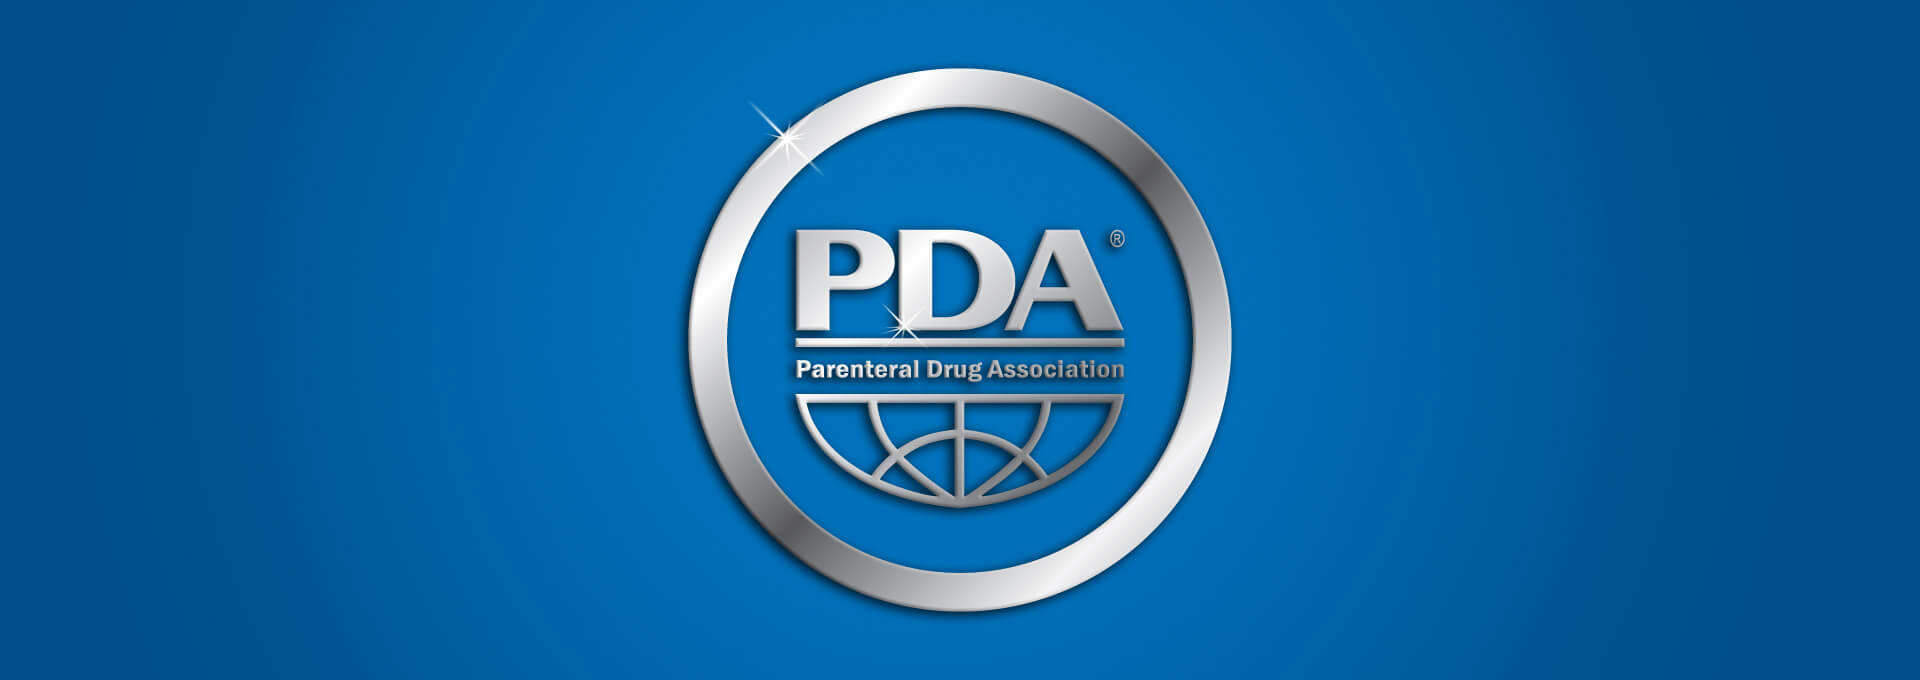 2021 PDA Honor Awards: Outstanding Early Career Professional Award​